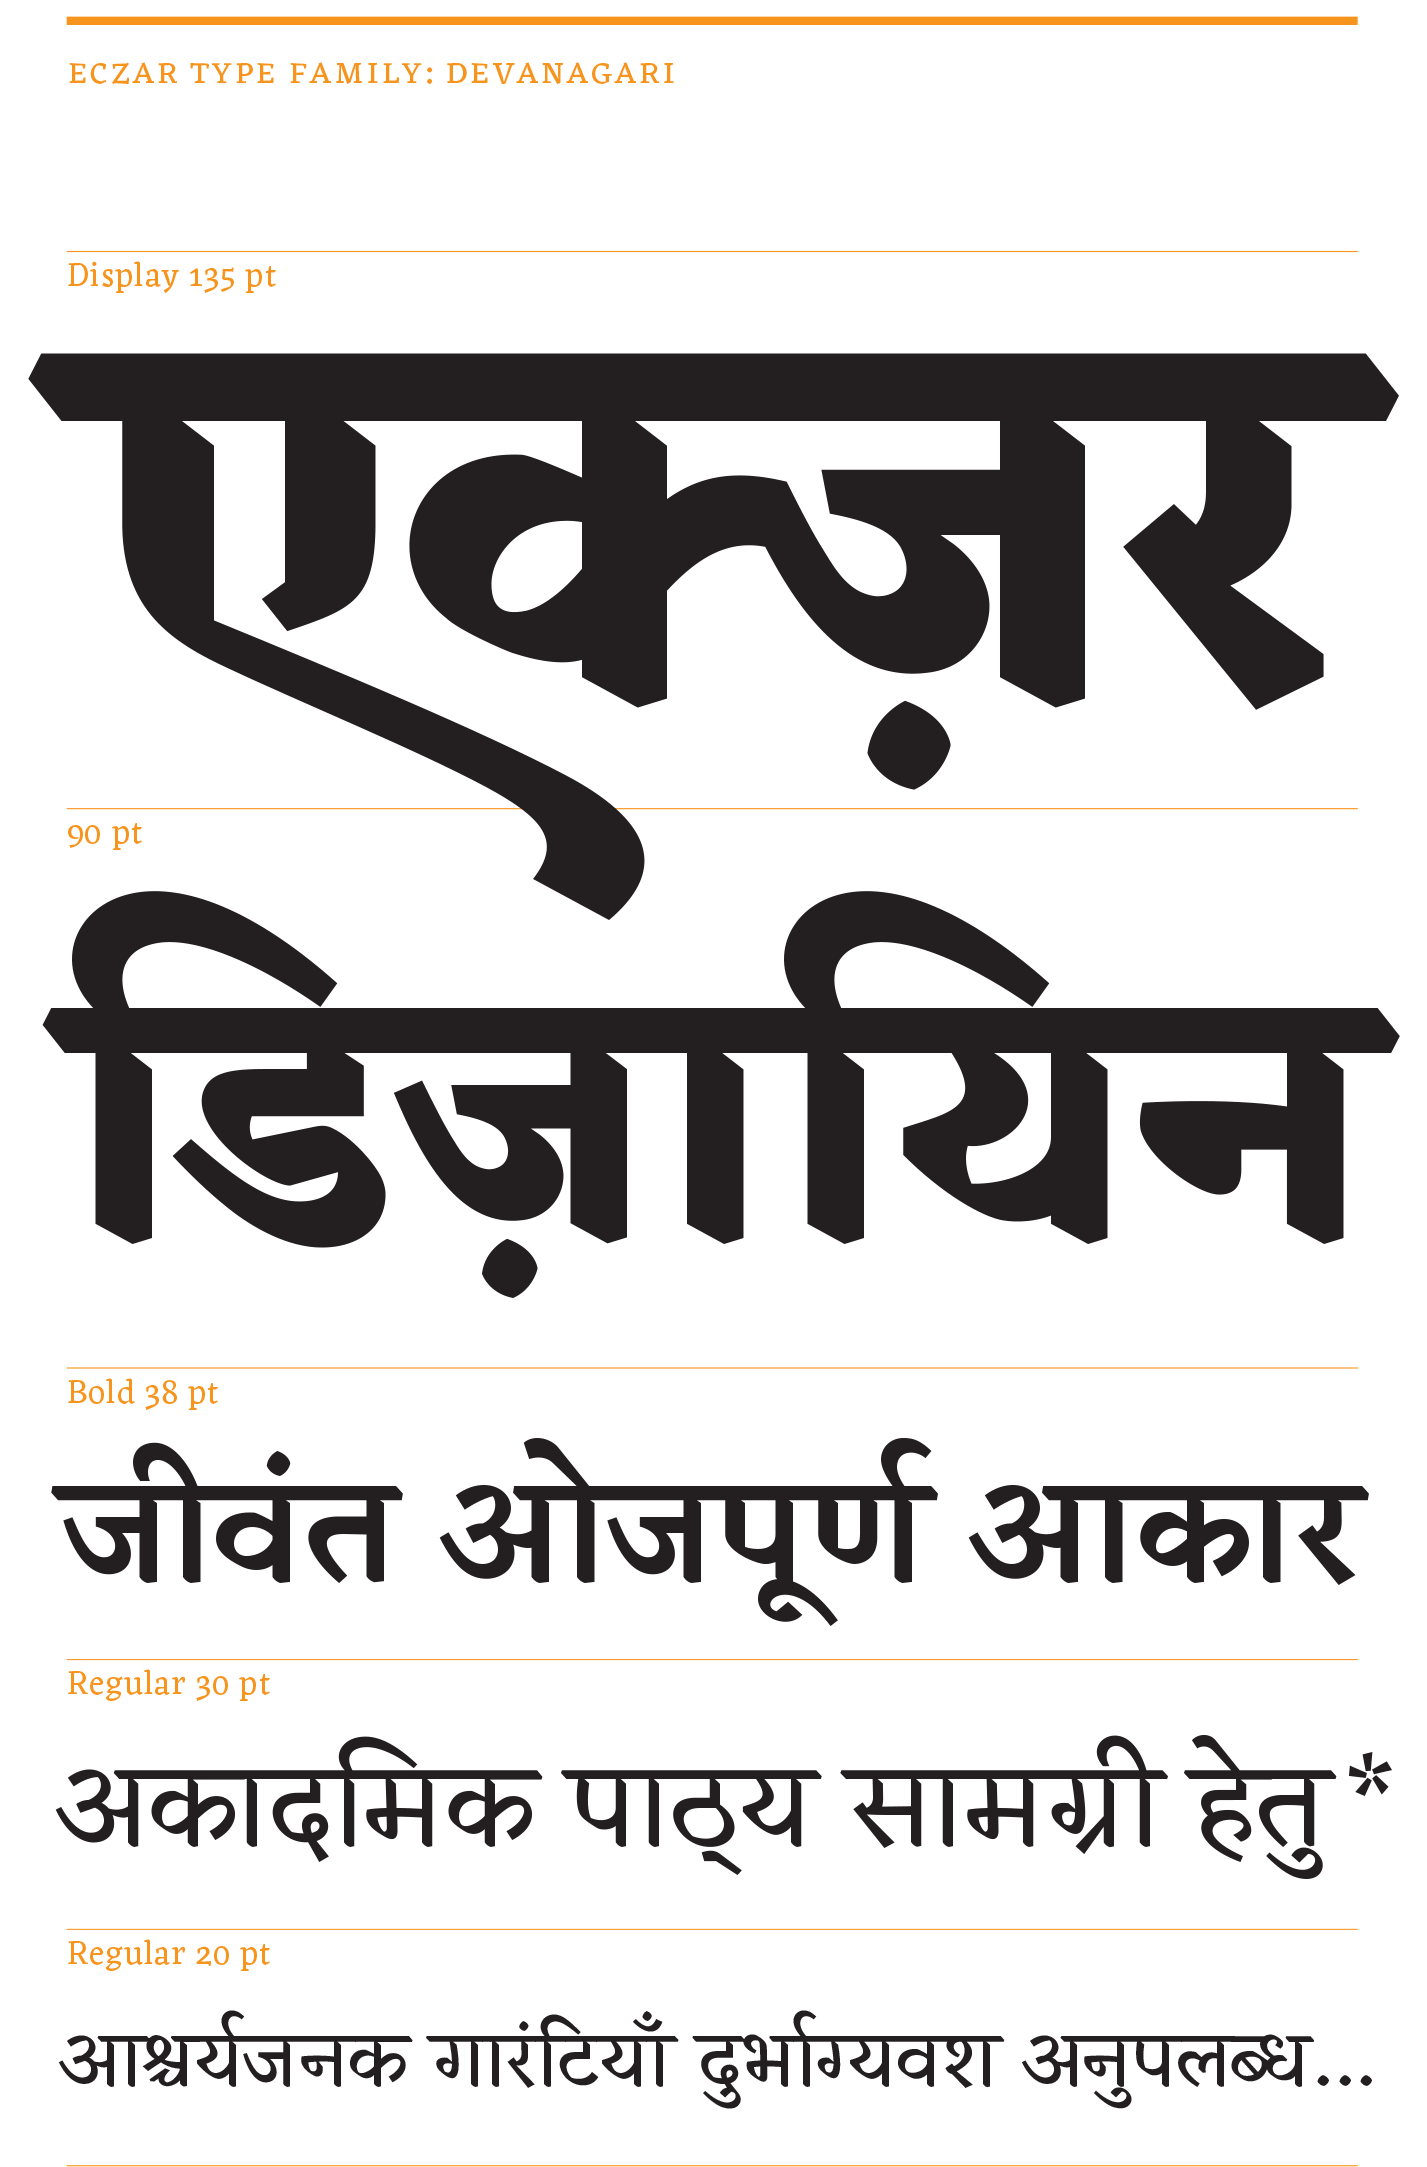 Vaibhav Singh's Devanagari [PDF] explores changes in pen shapes as the weight moves towards a Black Display.